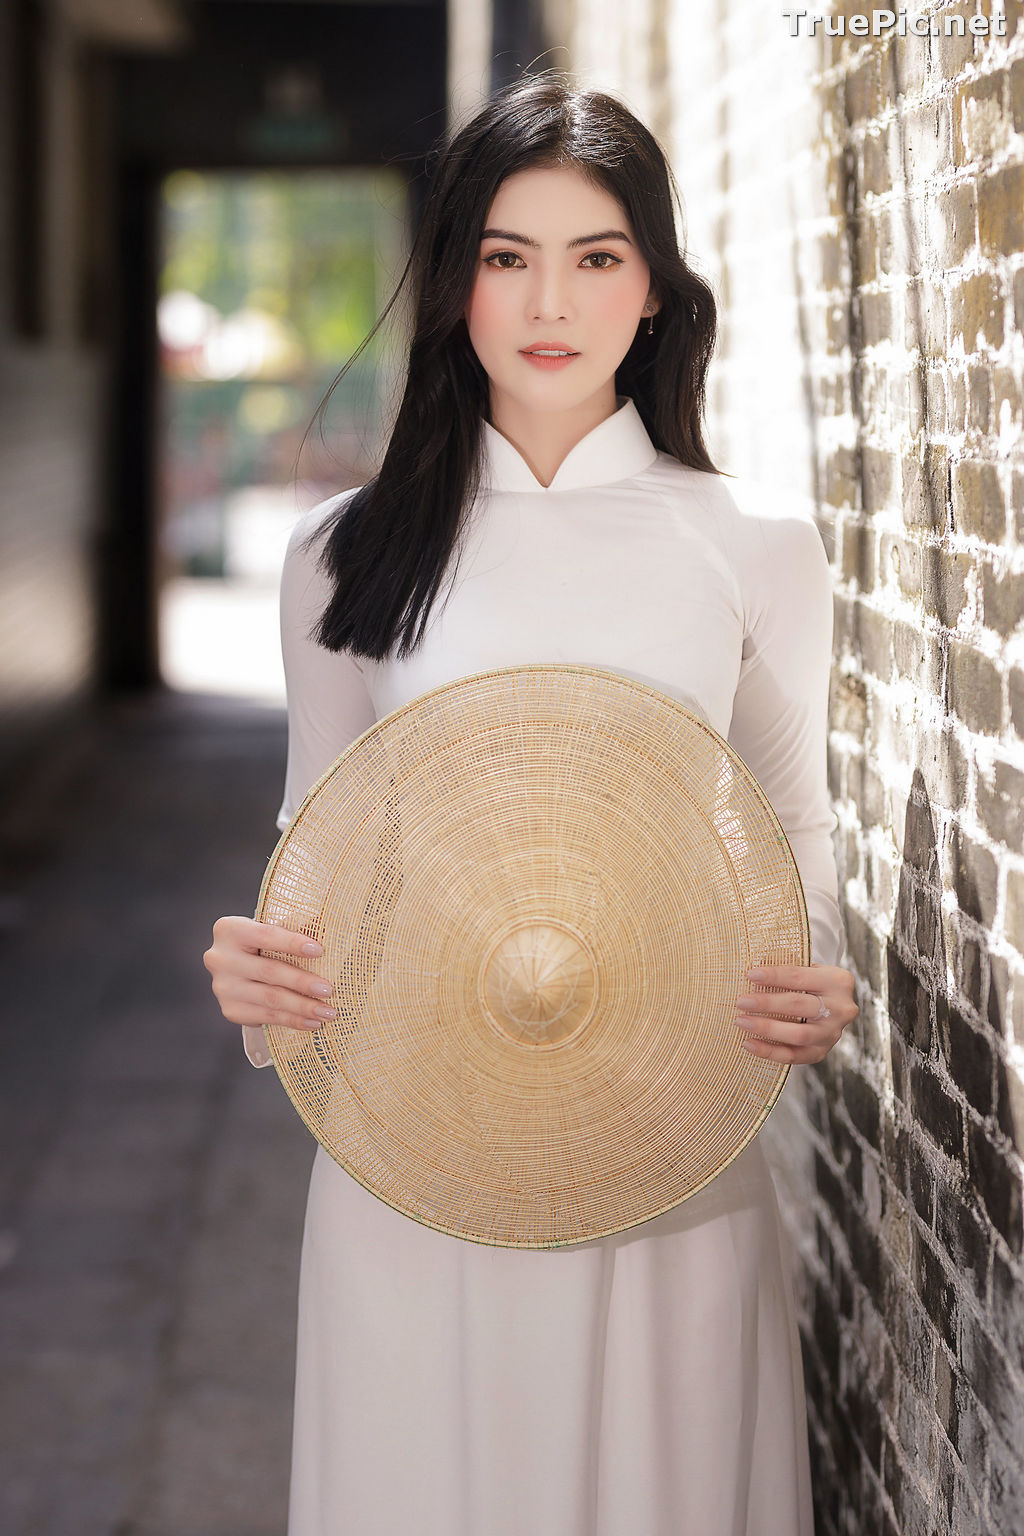 Image The Beauty of Vietnamese Girls with Traditional Dress (Ao Dai) #2 - TruePic.net - Picture-55